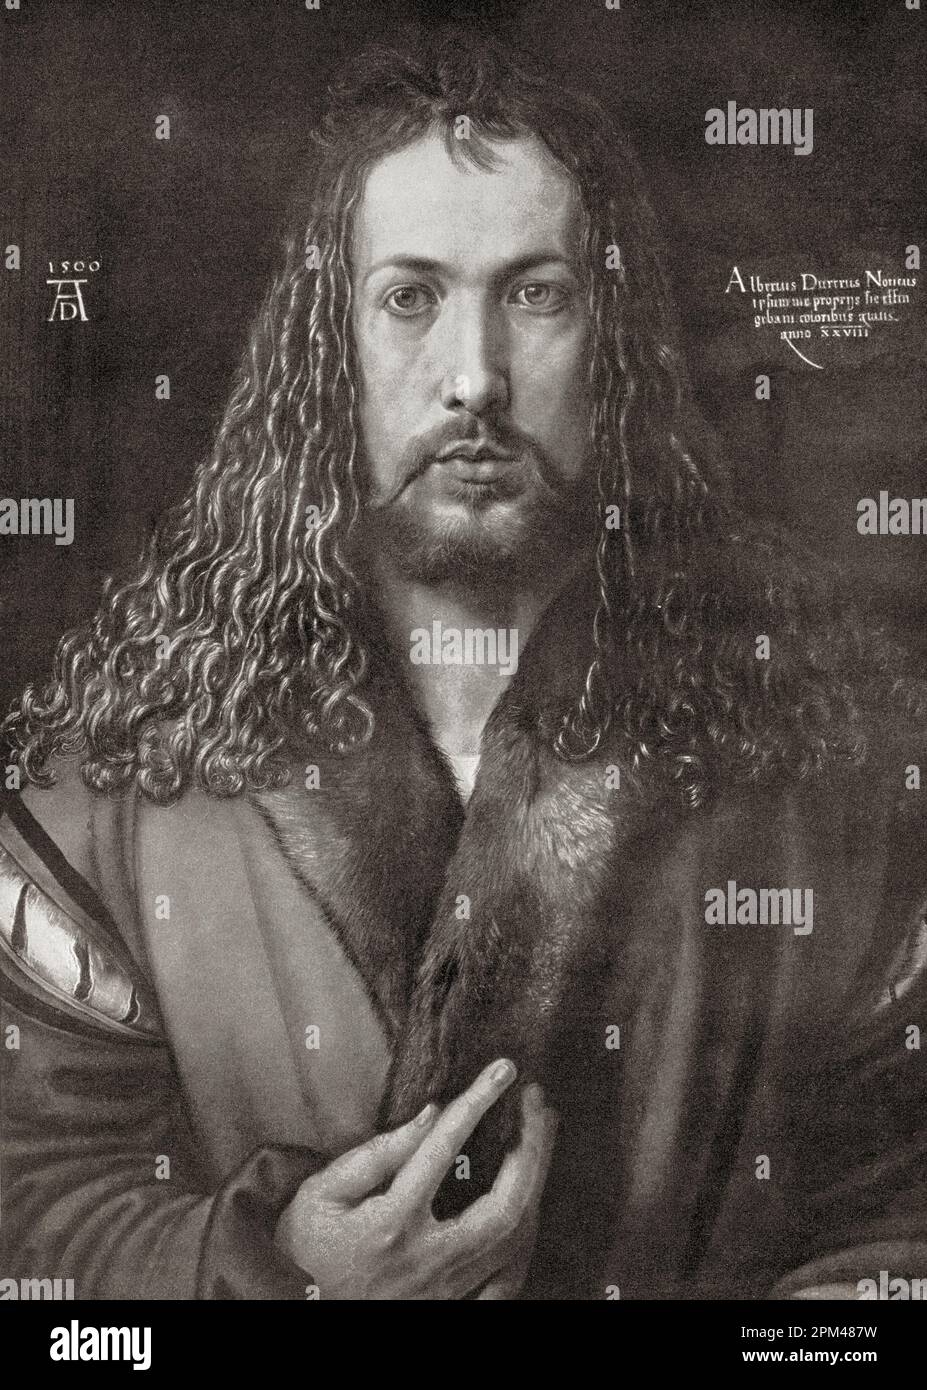 Dürer's self-portrait at 28 (1500).  After the work by Albrecht Dürer, 1471 – 1528,  sometimes spelled in English as Durer.  German painter, printmaker, and theorist of the German Renaissance.  From Albrecht Dürer, Sein Leben und eine Auswahl seiner Werke or His life and a selection of his works, published 1928. Stock Photo